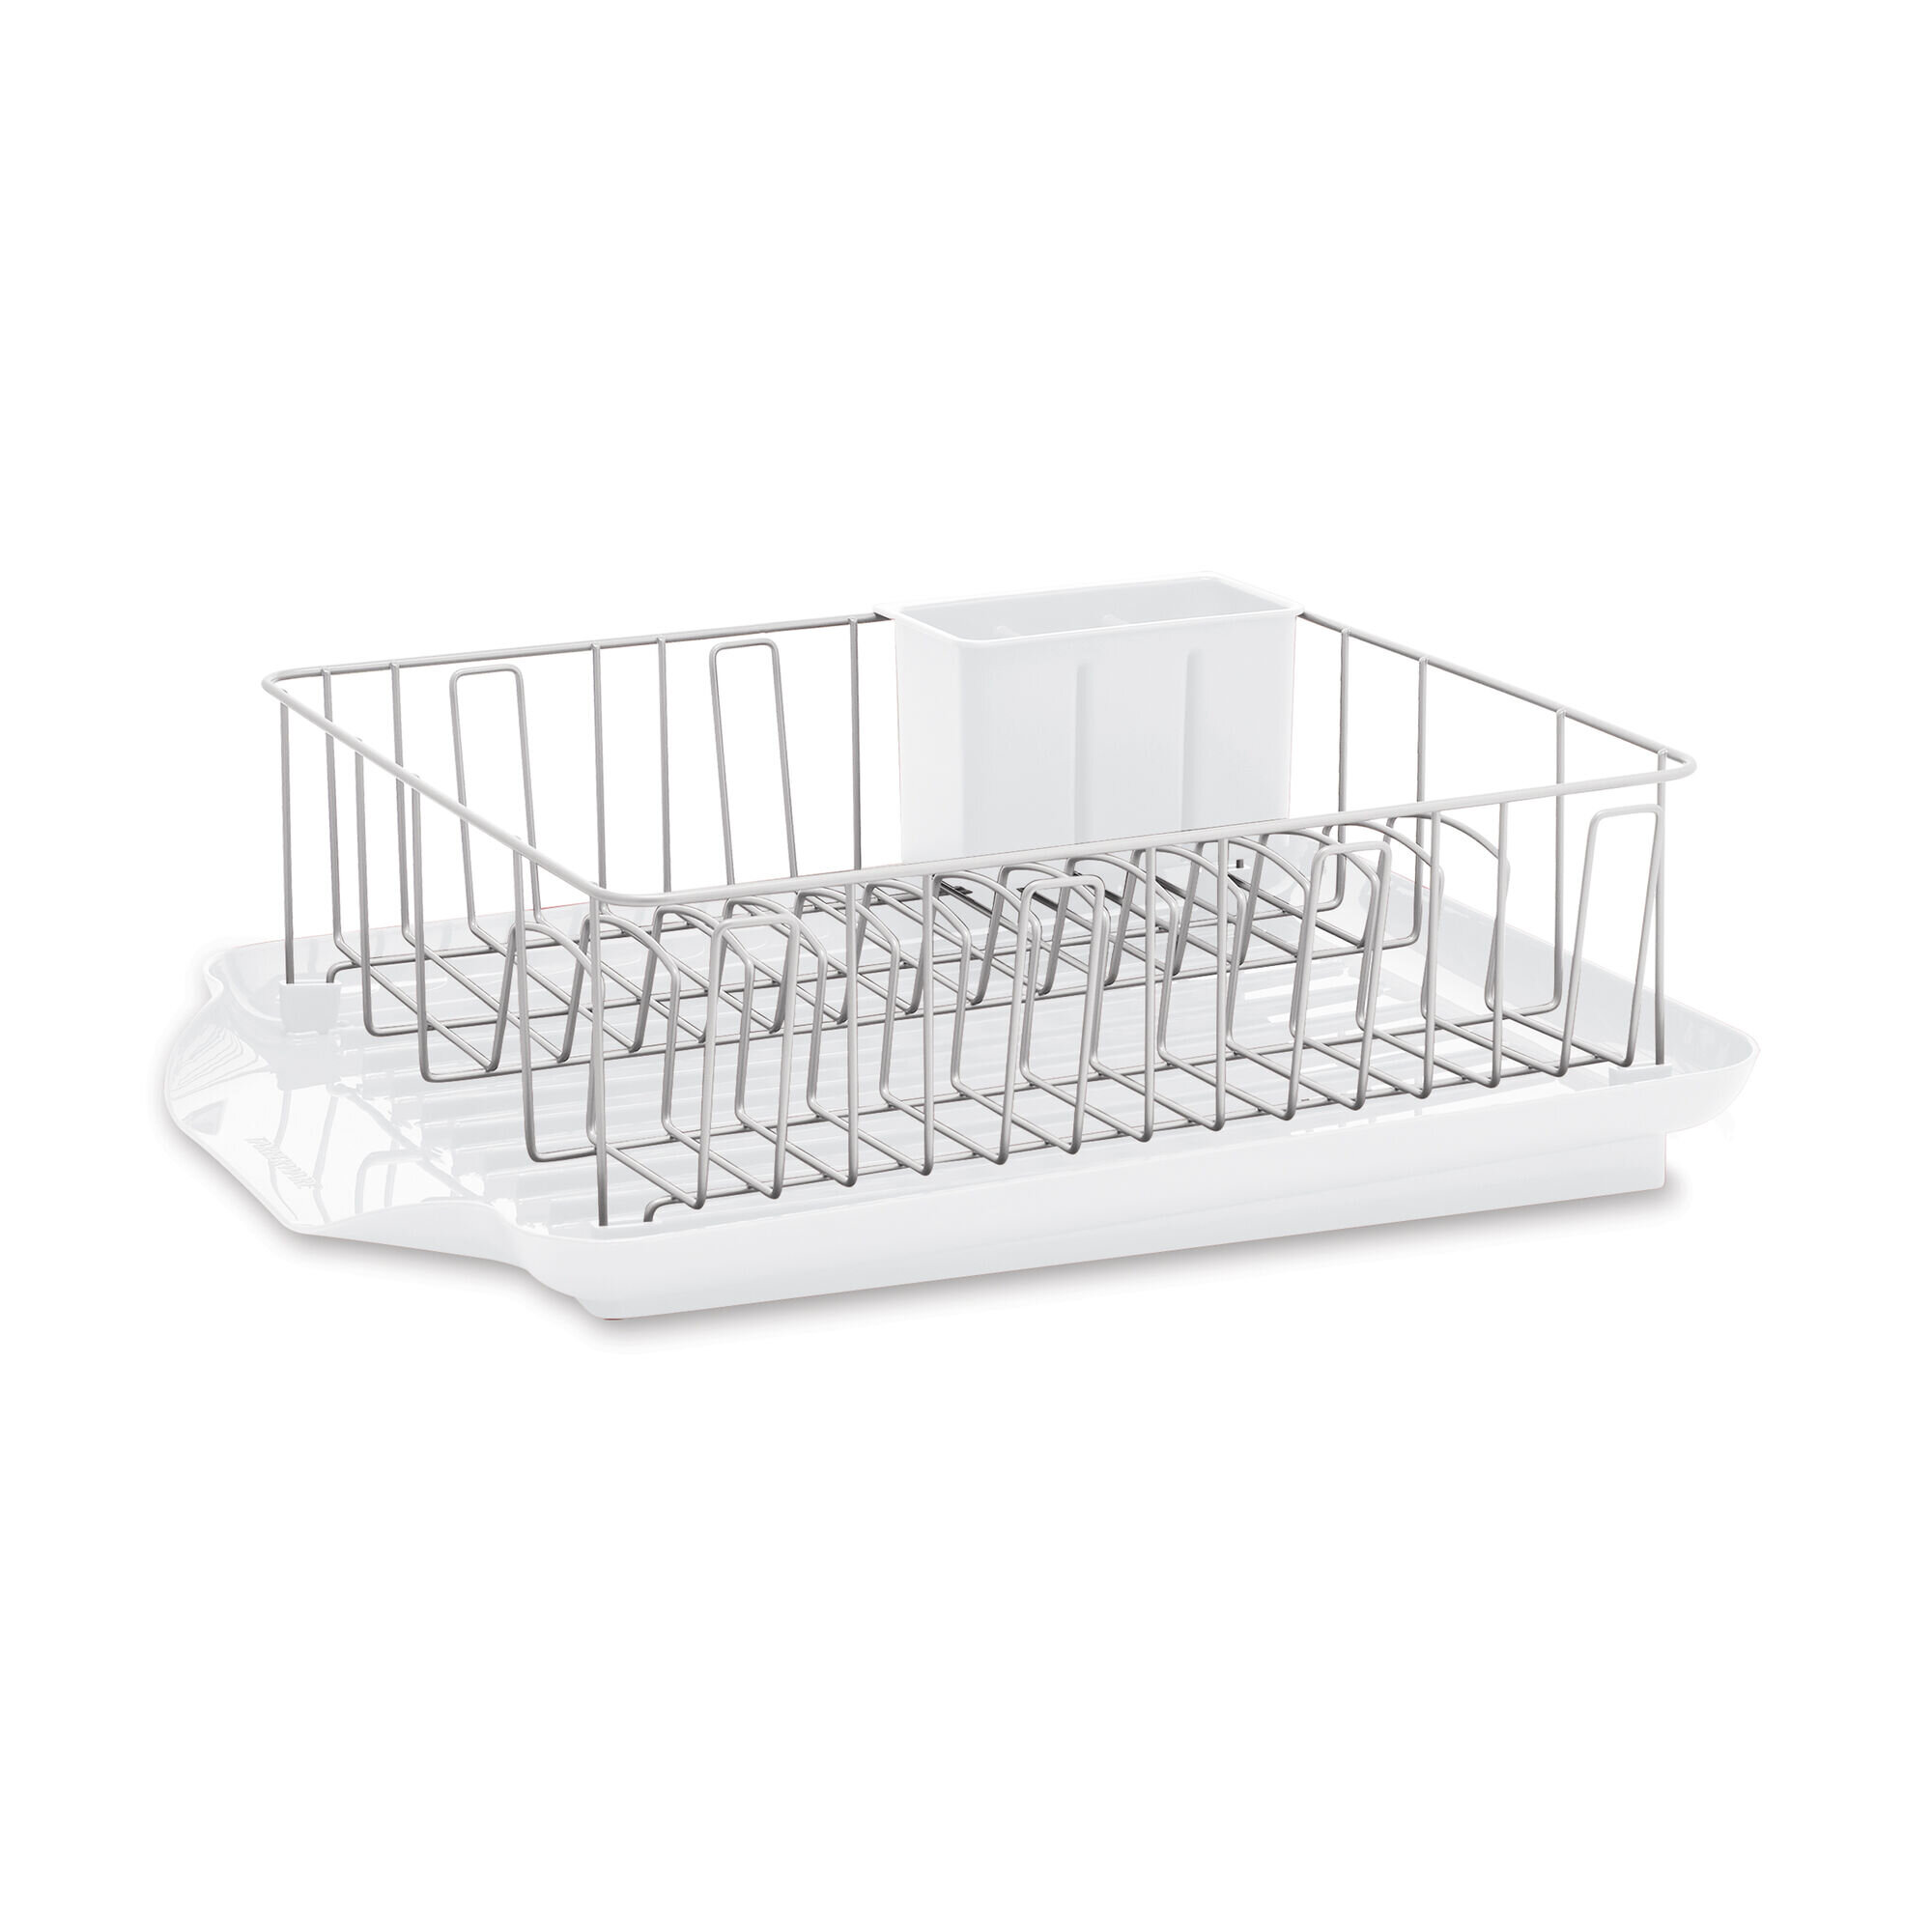 Home Basics 3 Piece Vinyl Coated Steel Dish Drainer with Drip Tray